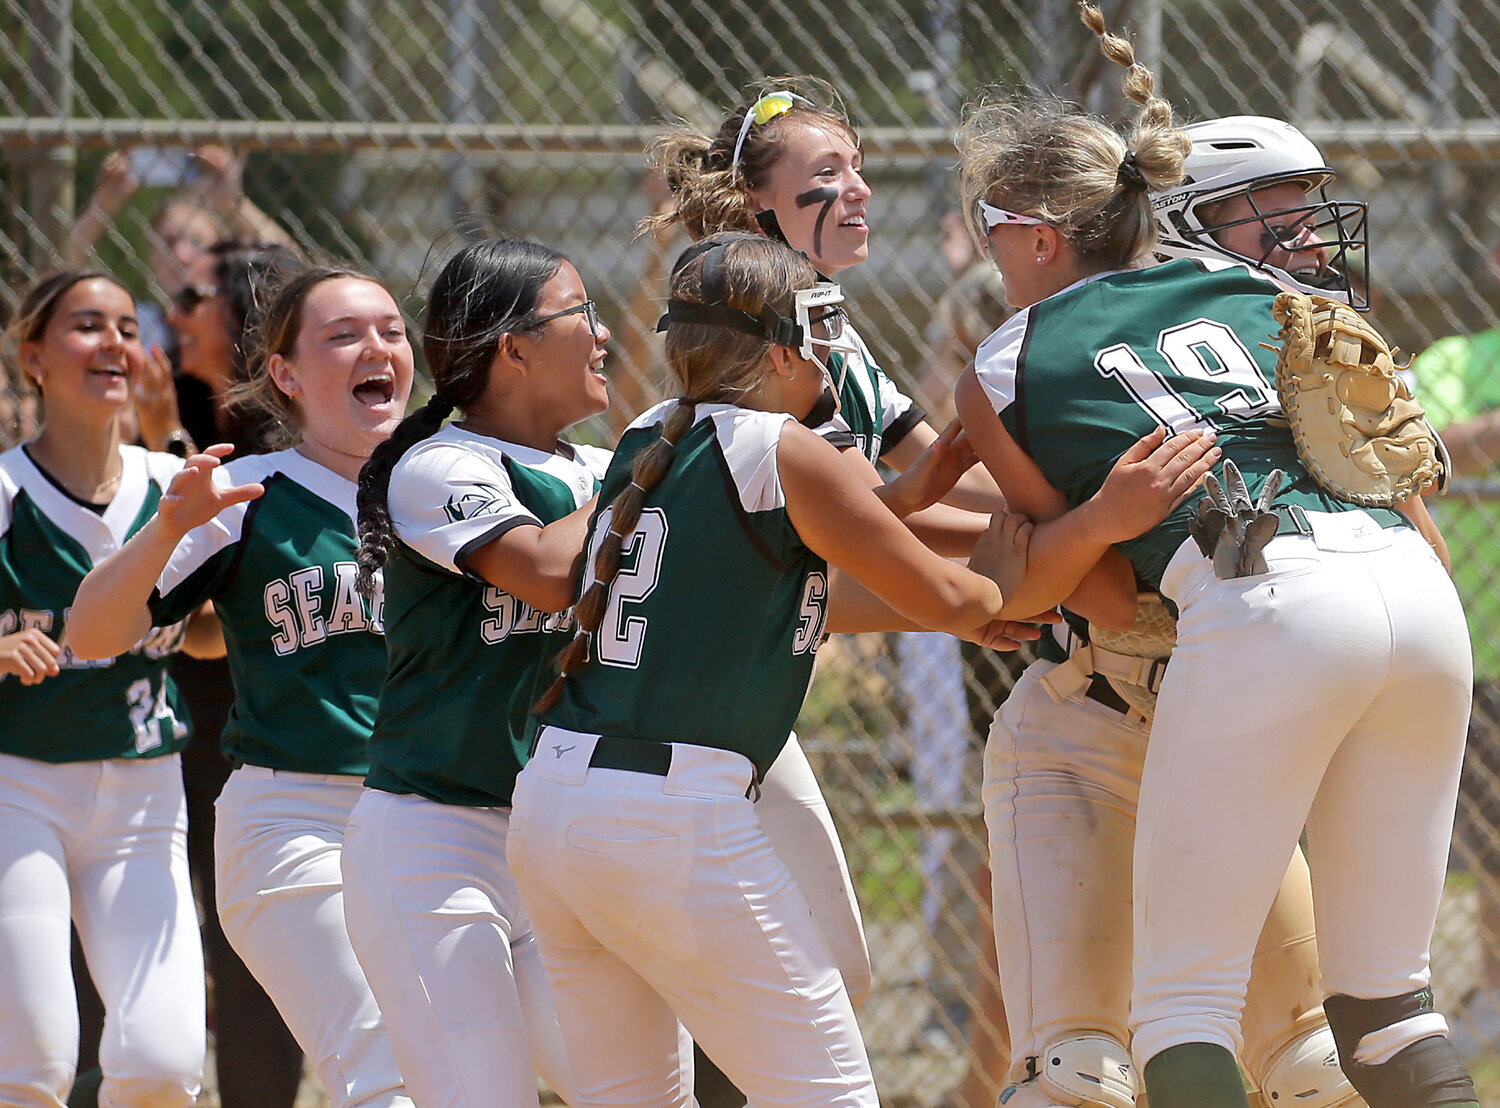 Seaford rallied to beat Carle Place, 11-4, to complete a sweep of the Nassau Class B softball championship series on Memorial Day at Mitchel Athletic Complex.